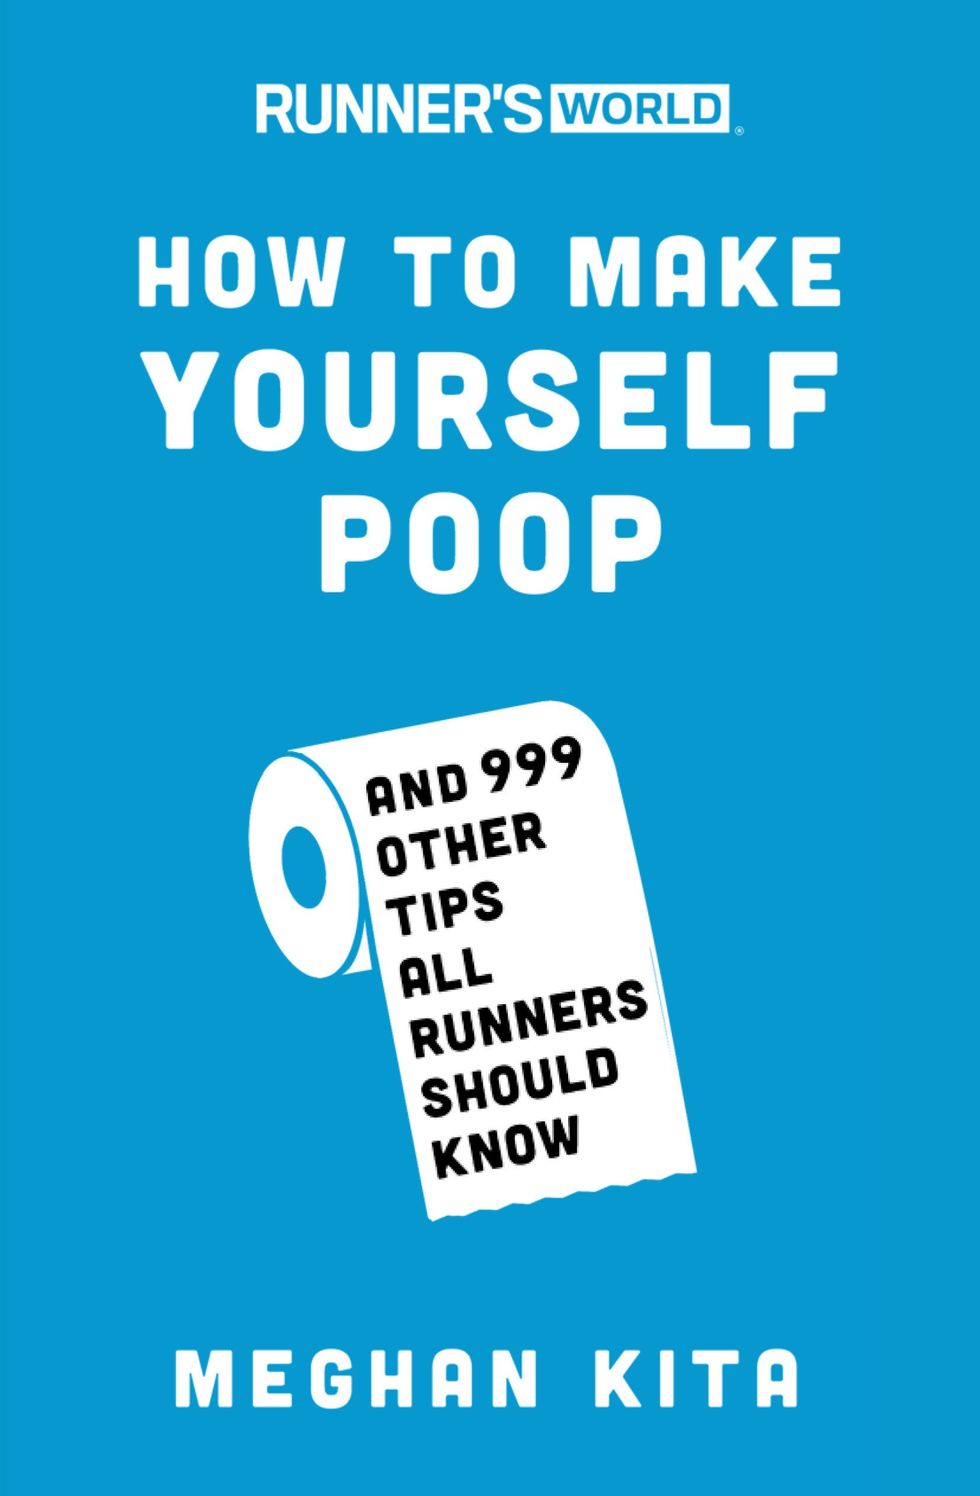 'Runner’s World How to Make Yourself Poop: And 999 Other Tips All Runners Should Know' by Meghan Kita